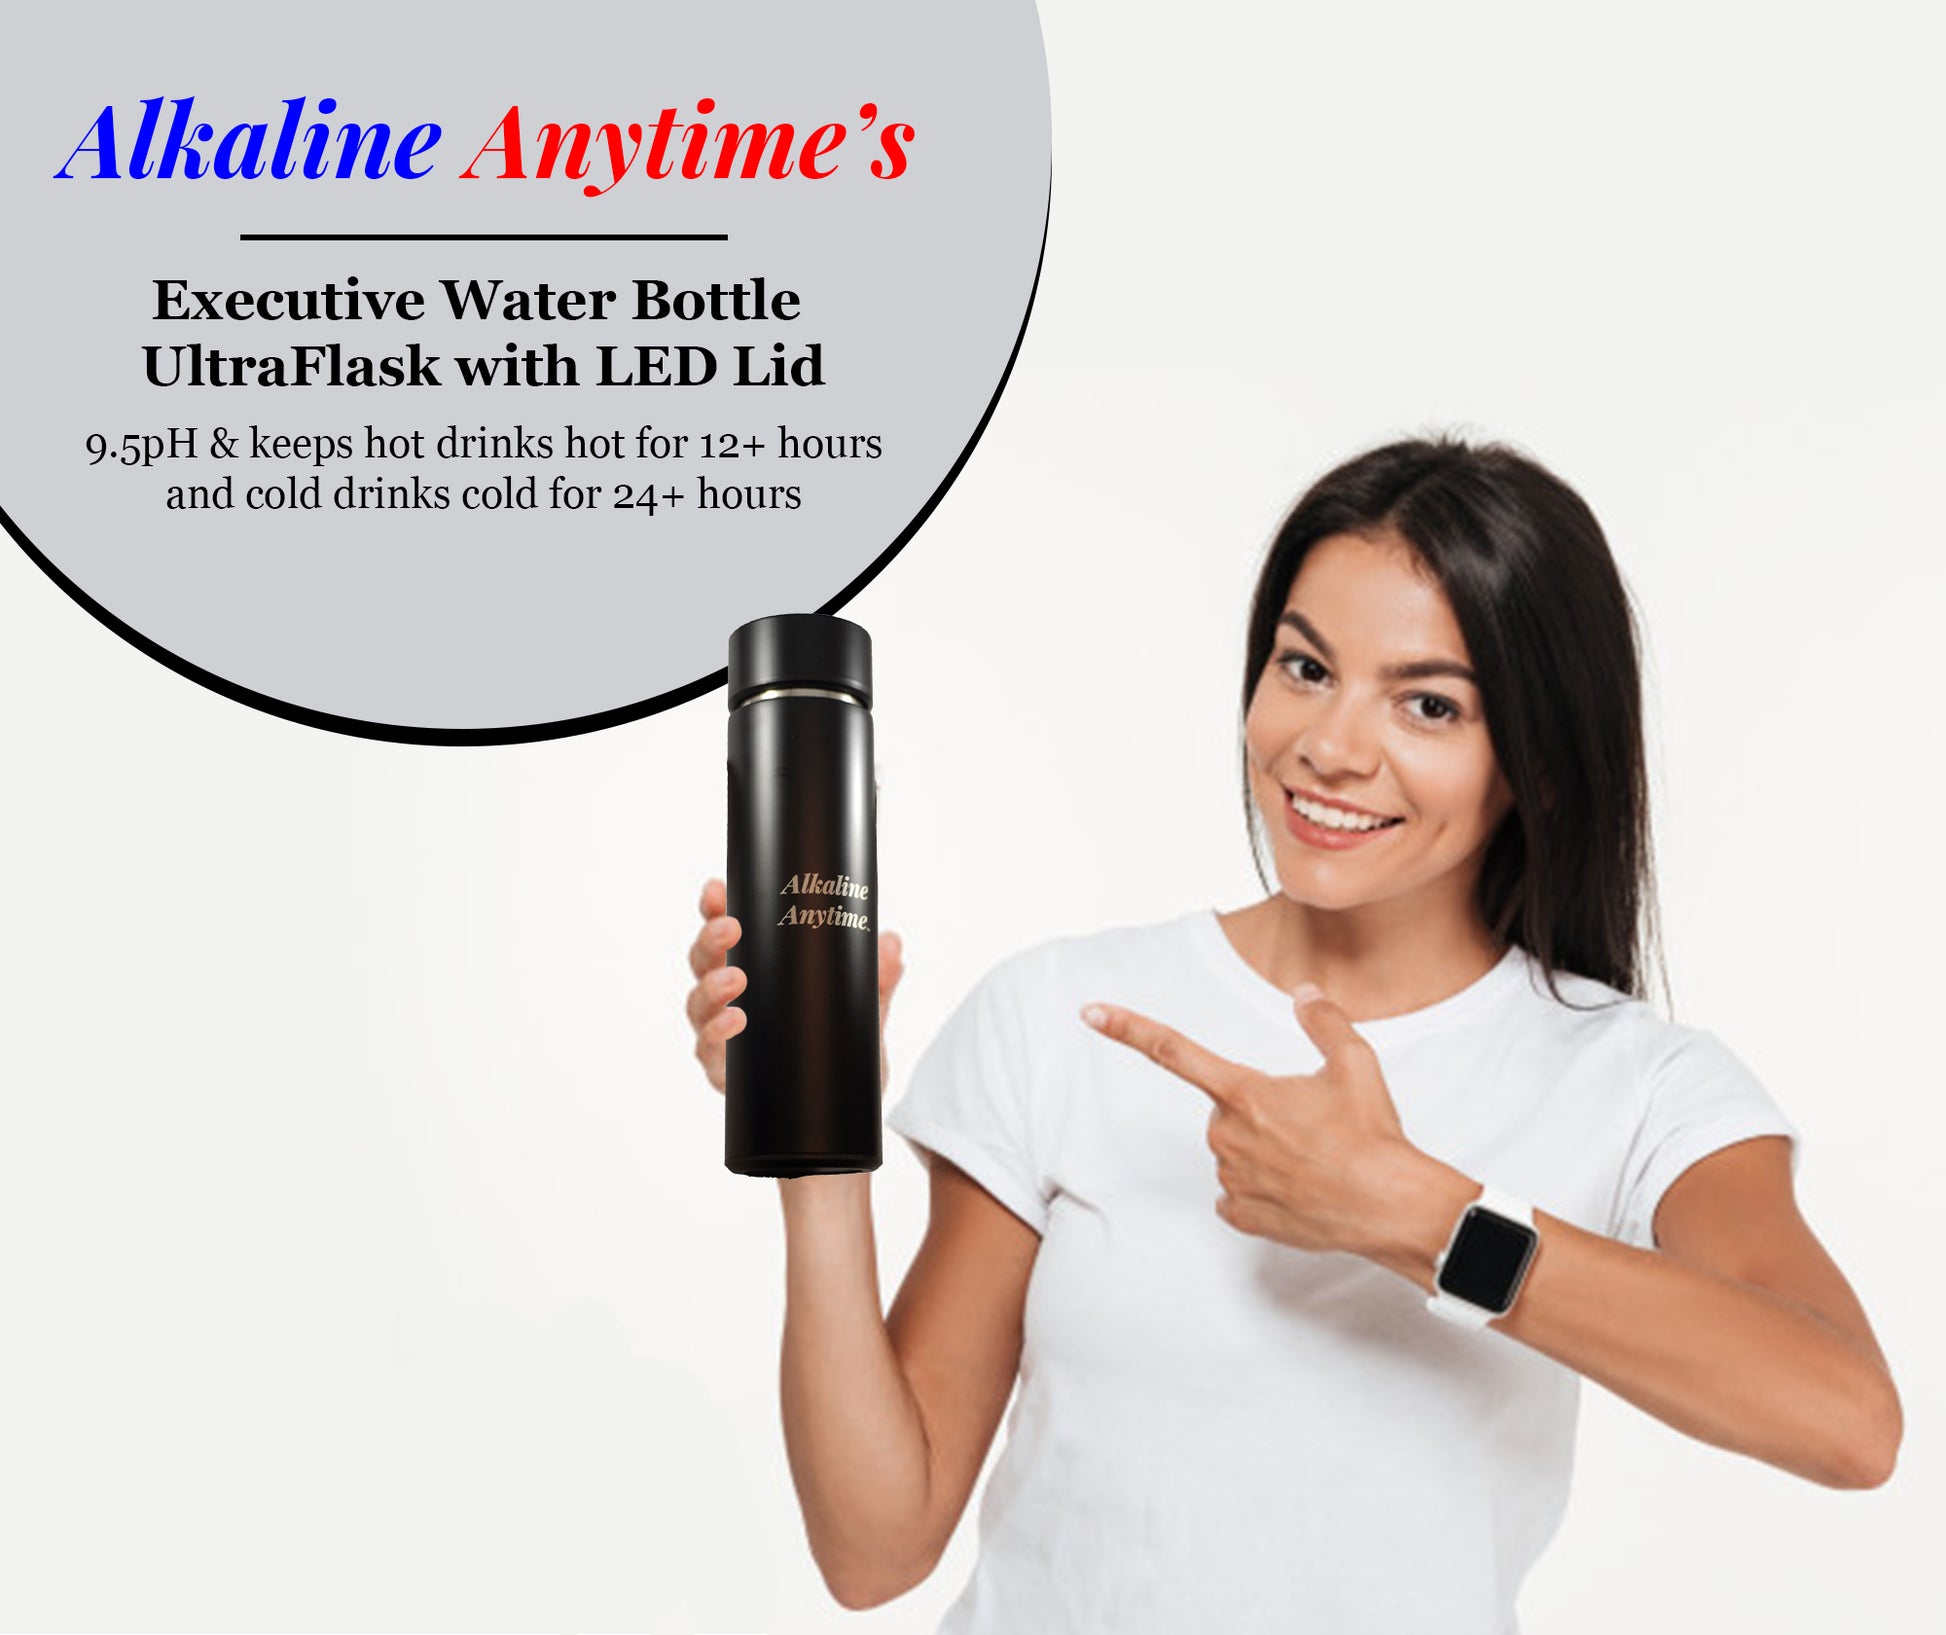 Executive Water Bottle- 2 Lids (LED Display & Steel Lid) & 3 Alkaline Water Pouches - Alkaline Anytime